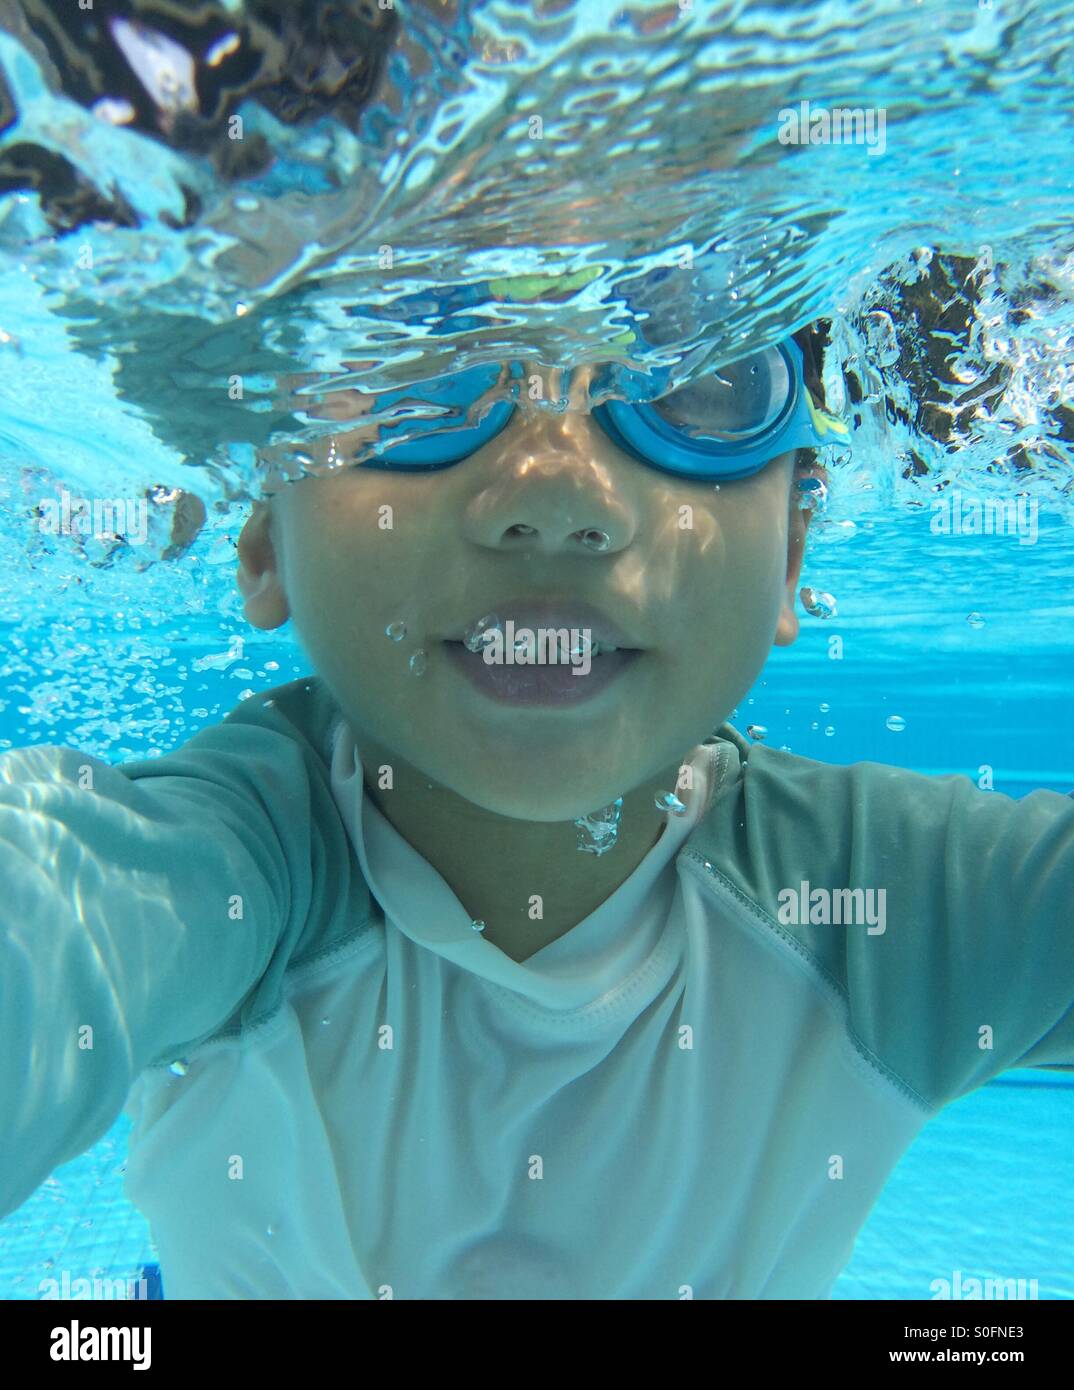 underwater-image-of-a-young-5-year-old-a